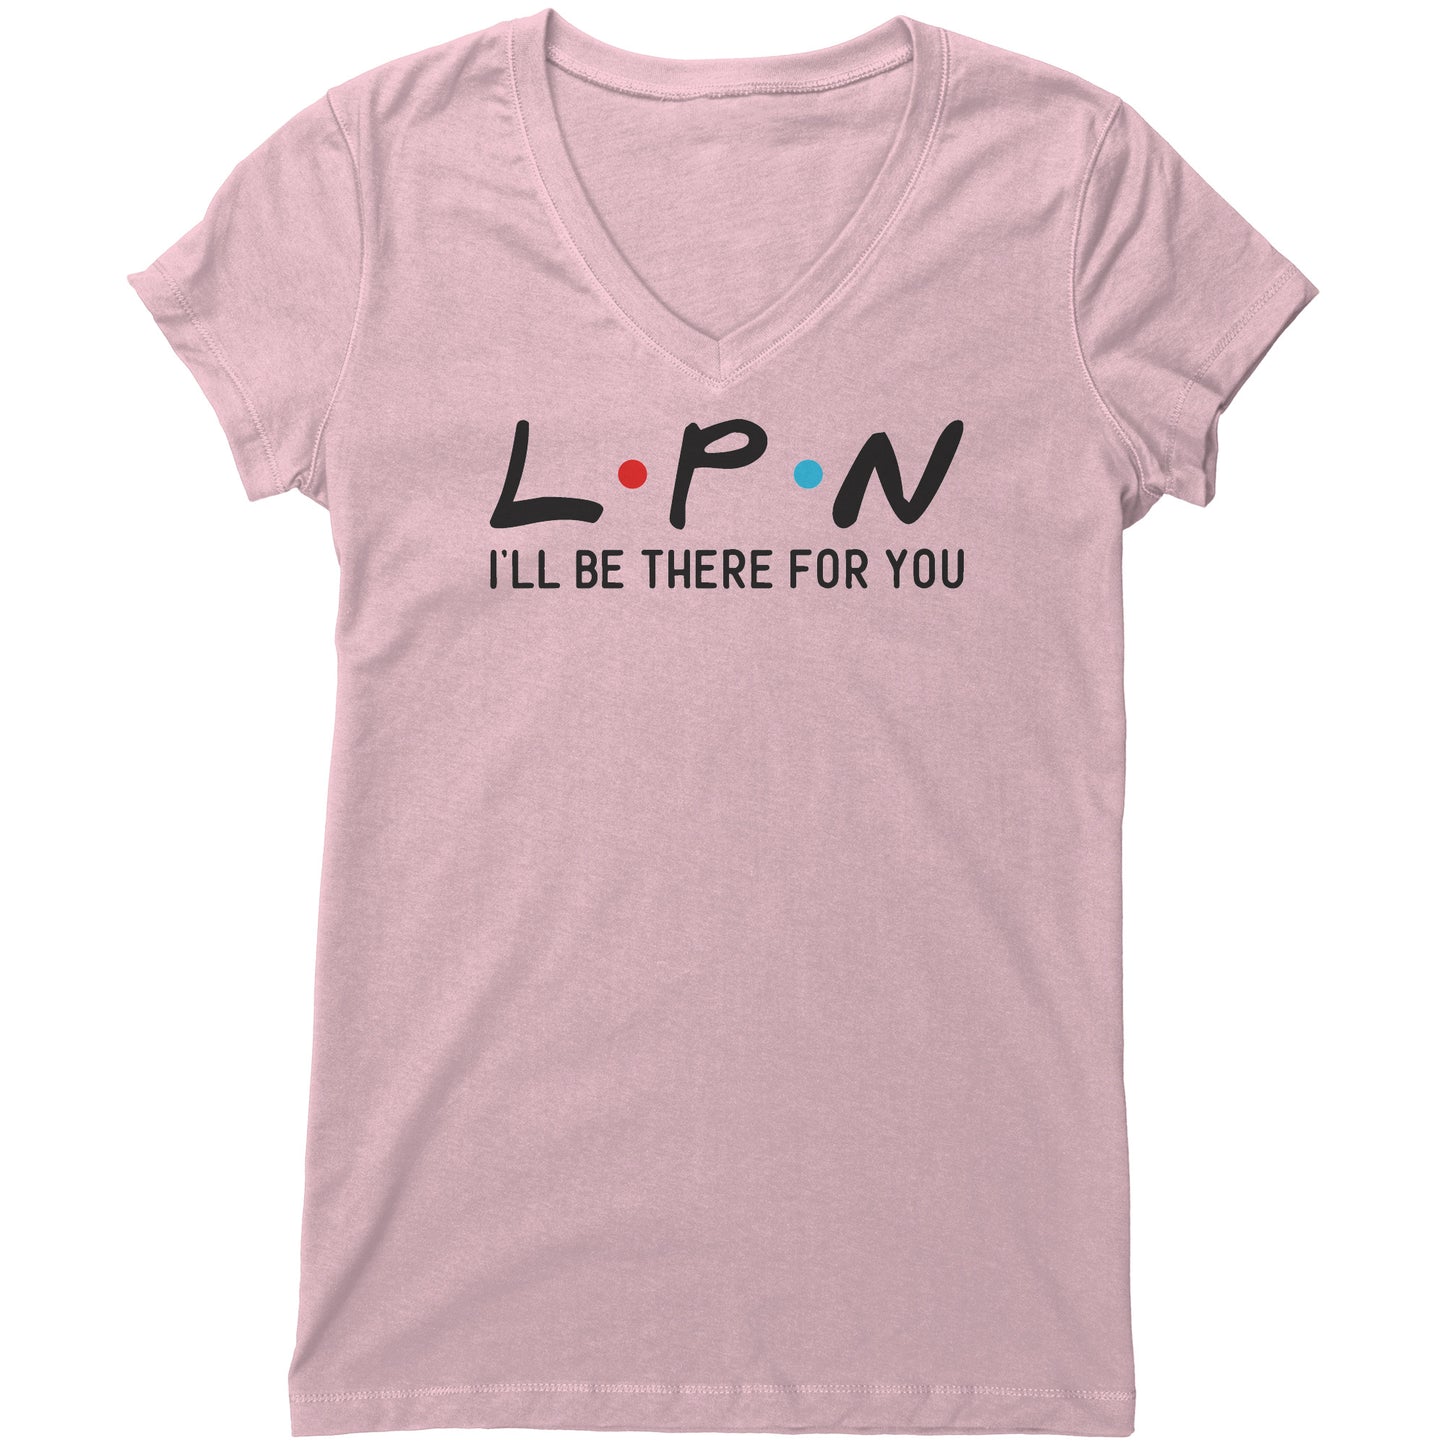 "LPN I'll Be There For You" Women's V-Neck T-Shirt – Comfortable & Stylish Fit for Nursing Professionals